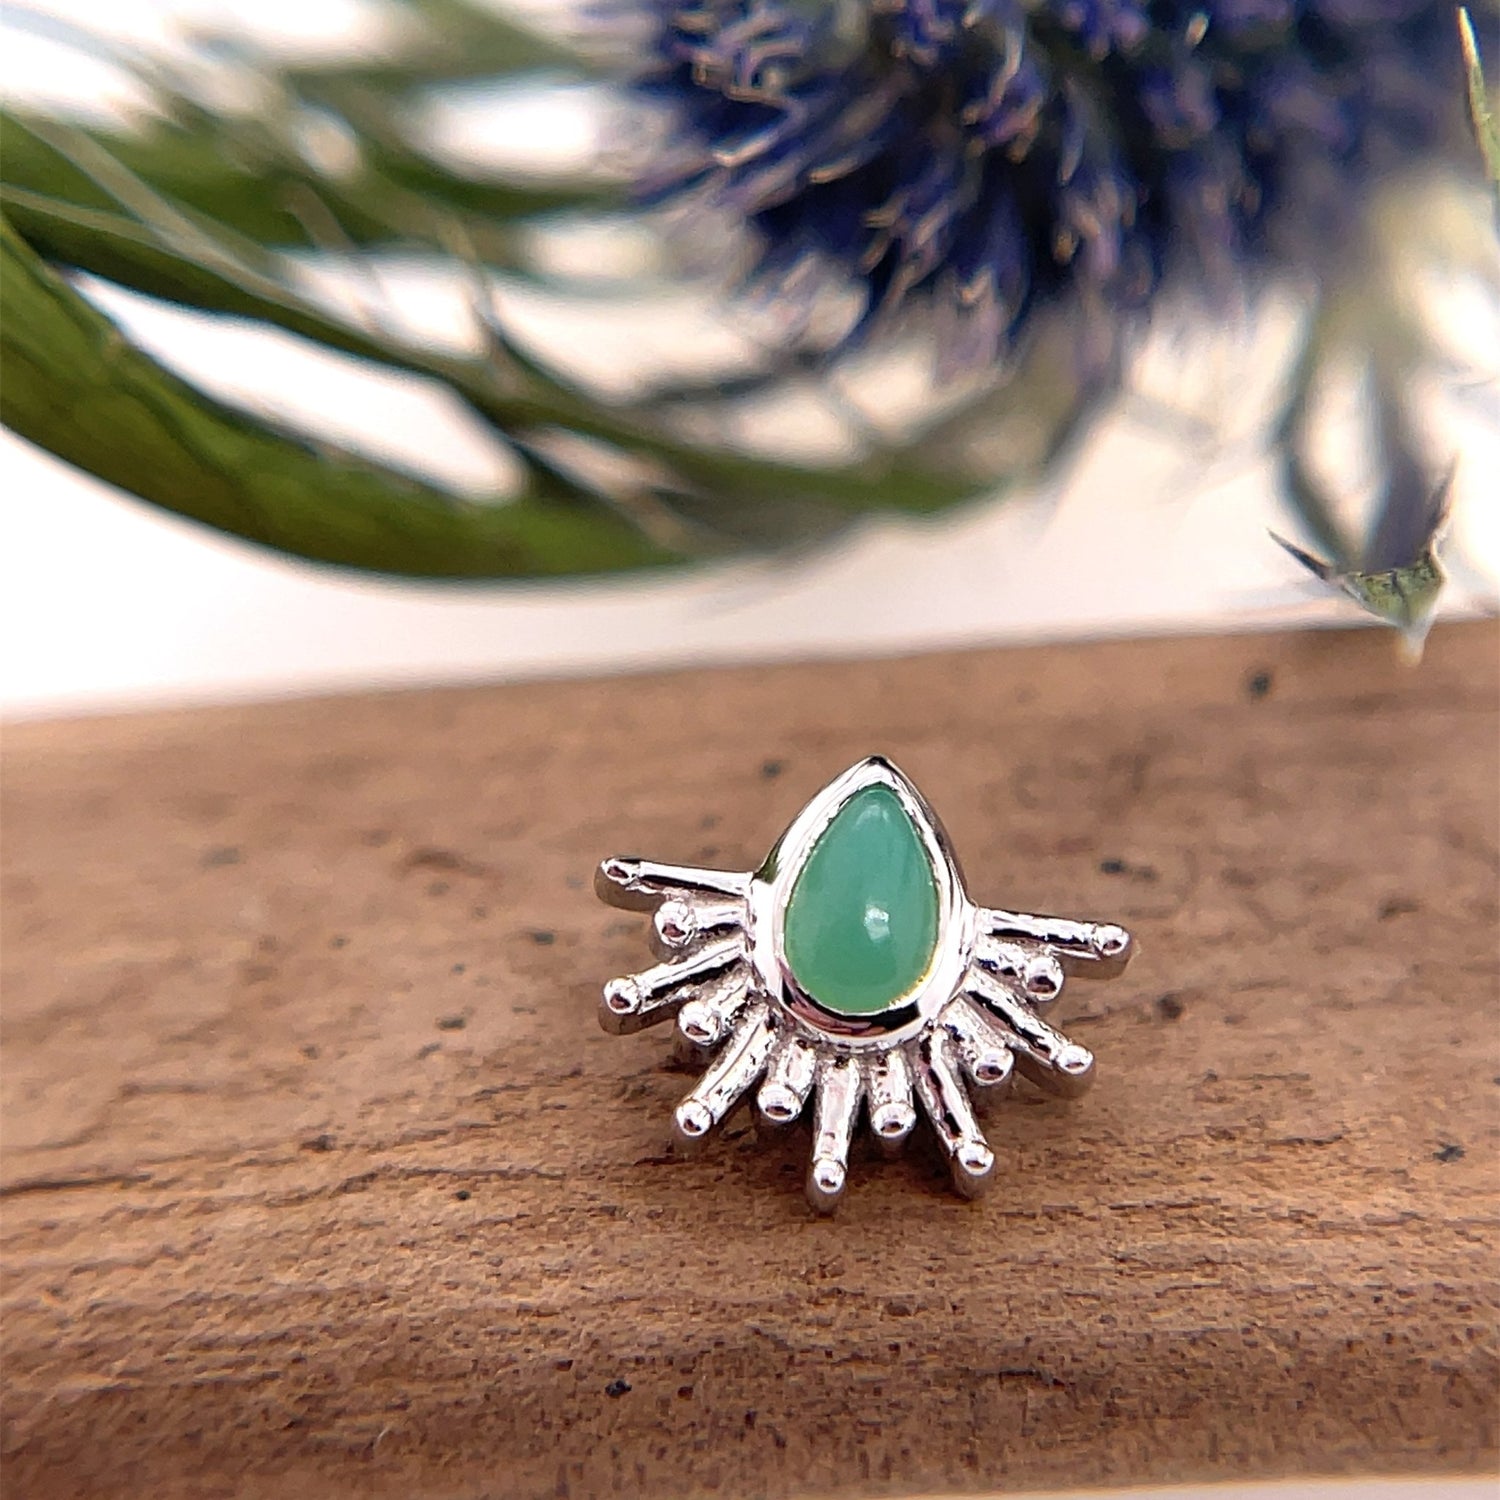 Borderline with Pear Bezel - Threaded - Agave in Bloom